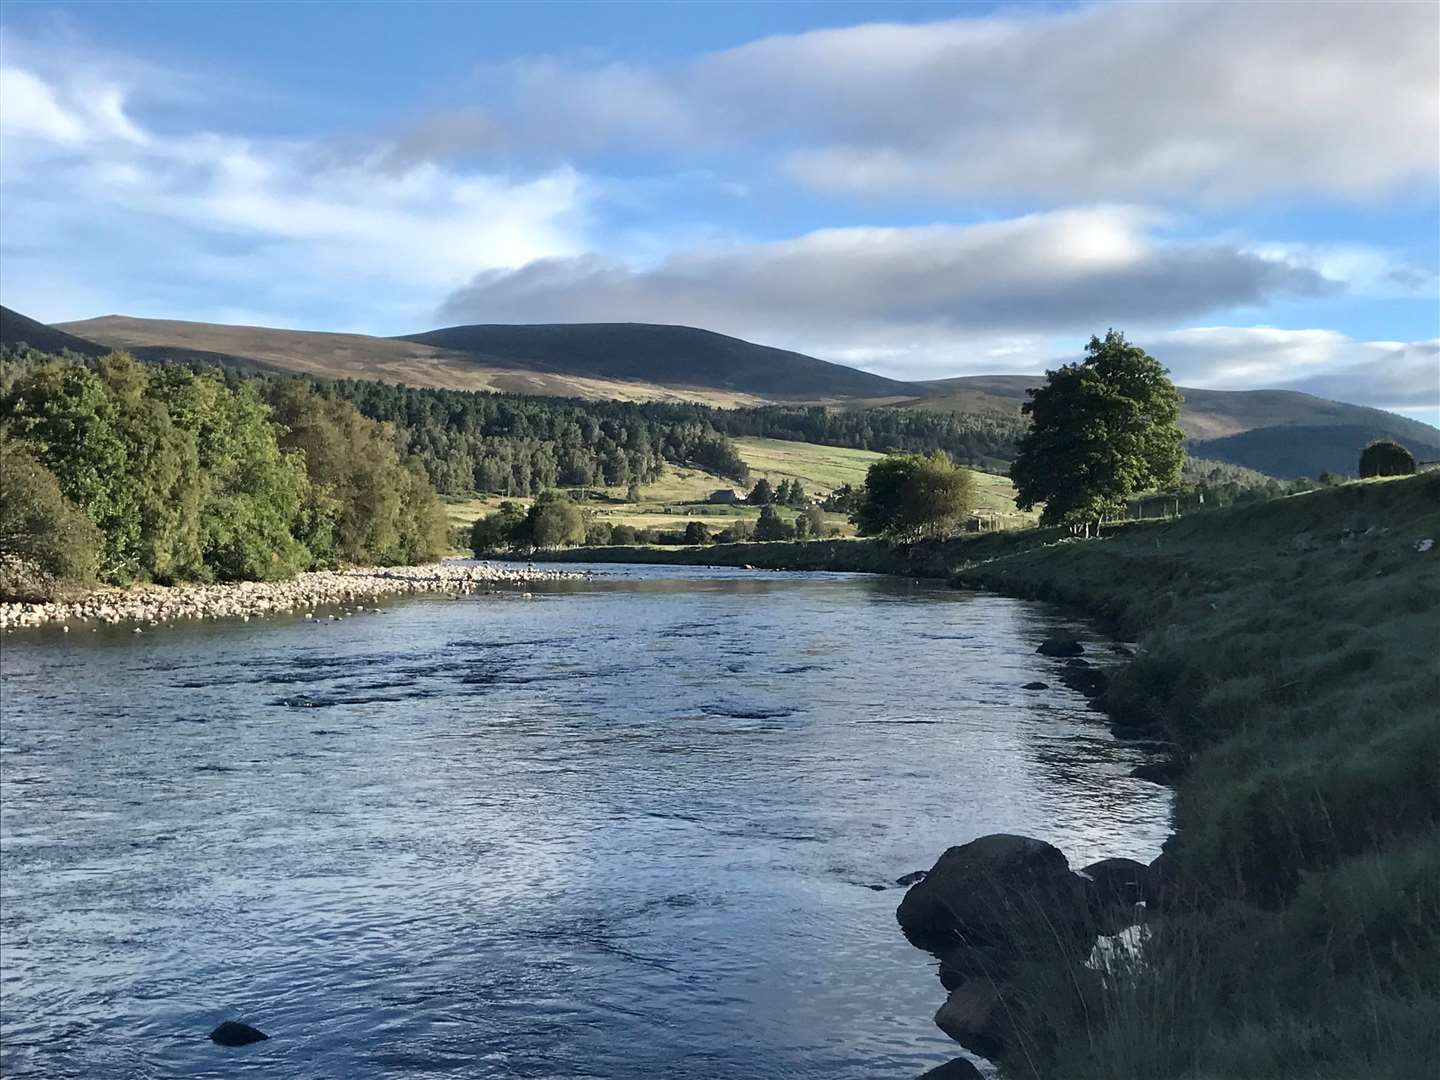 The study will focus on the RIver Dee as part of the trial